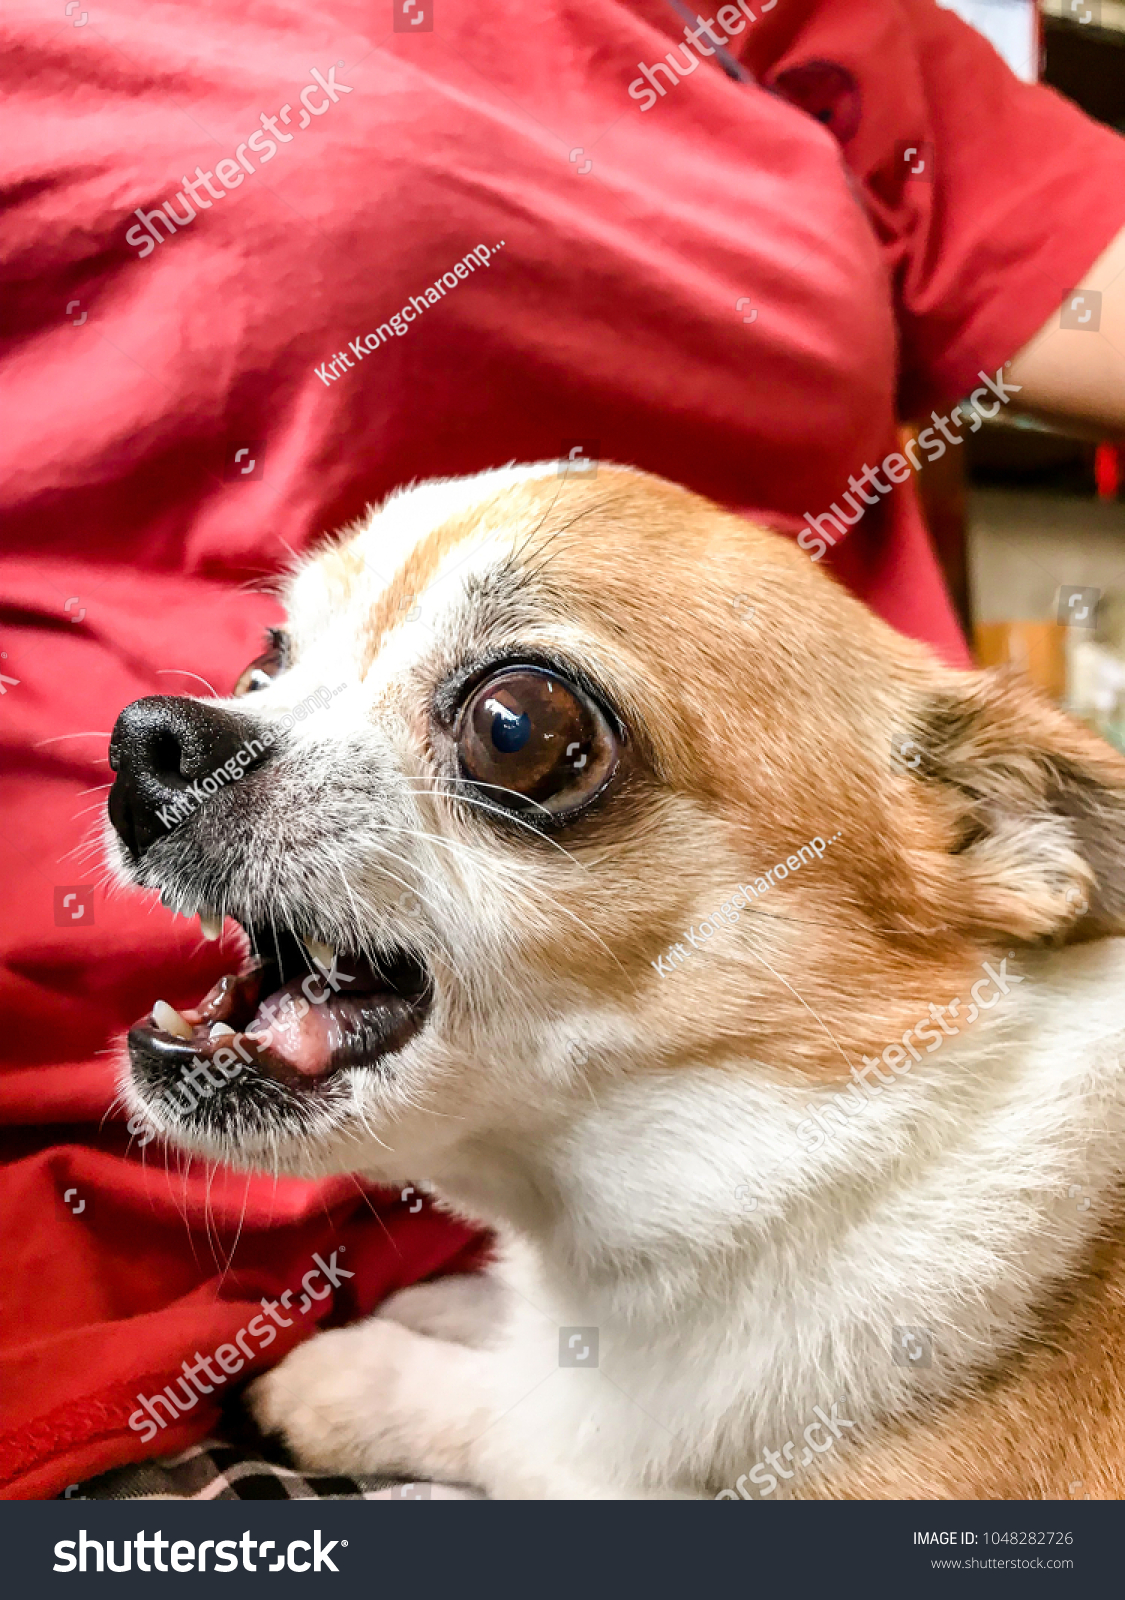 Face Angry Chihuahua Breed Dog Threaten Animals Wildlife Stock Image 1048282726